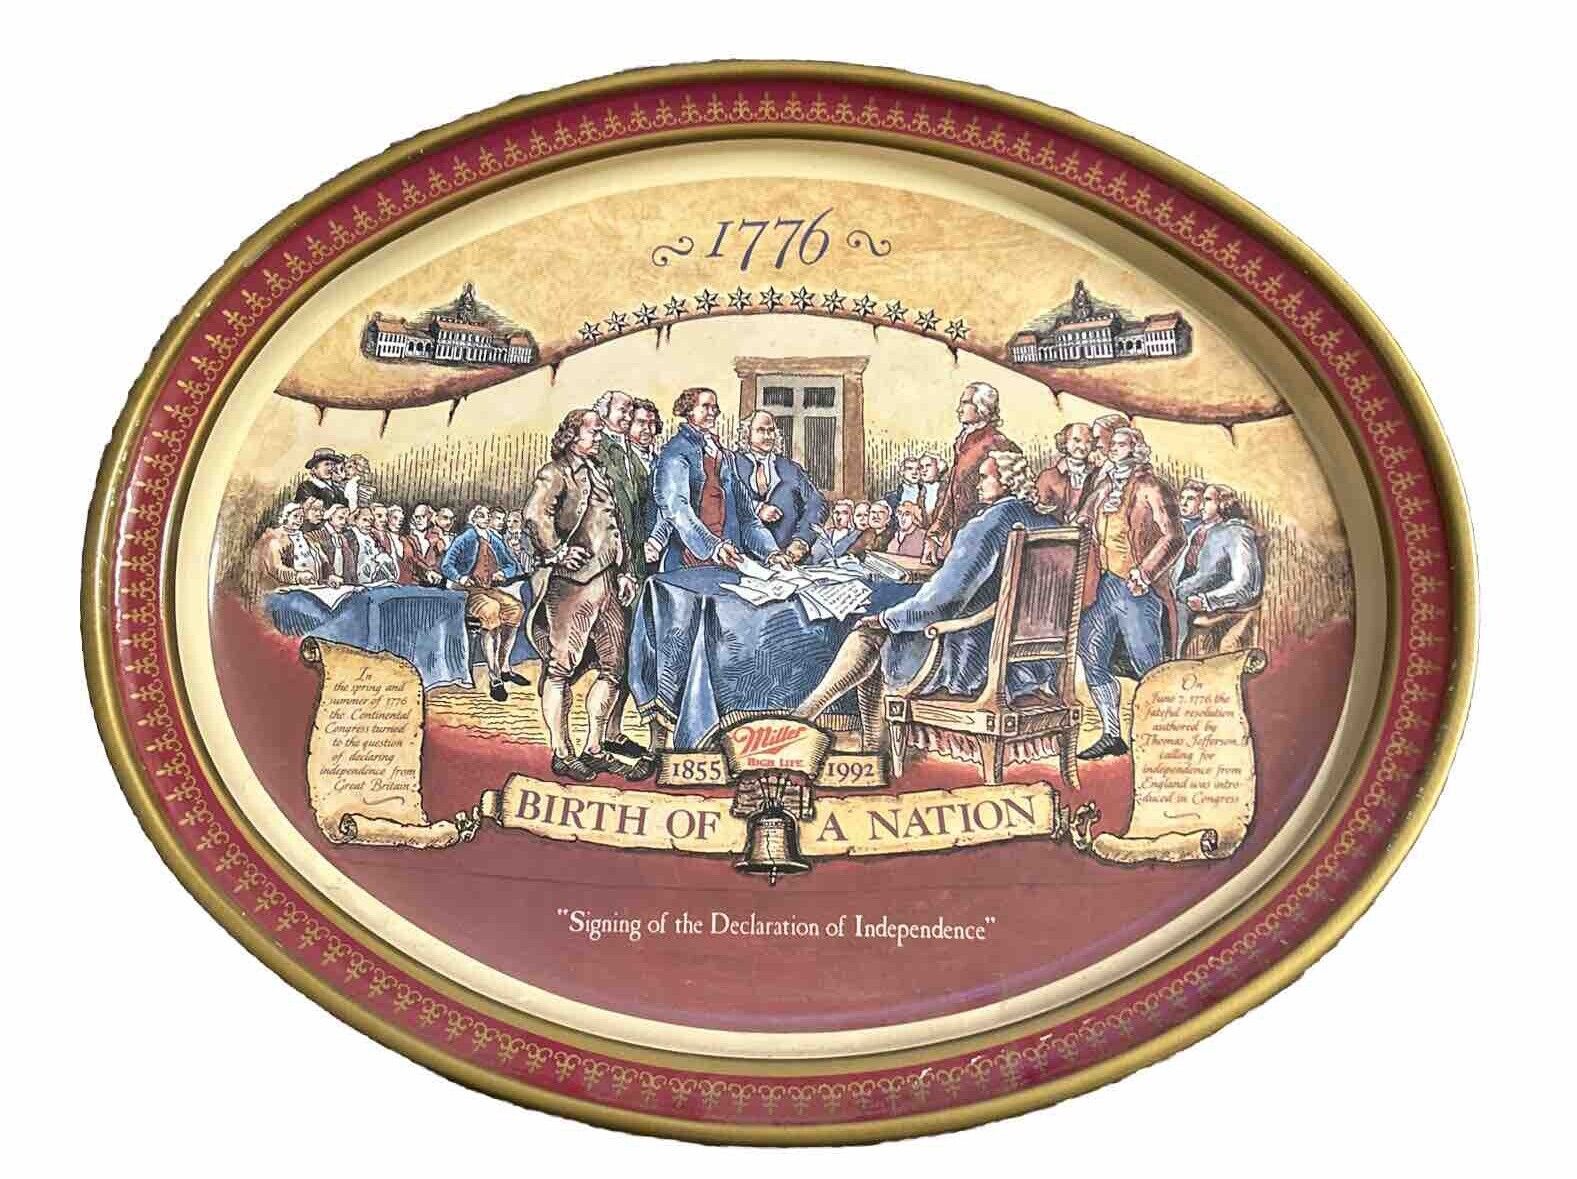 Vintage 1992 Miller High Life Advertising Beer Tray 1776 Birth Of A Nation (C)